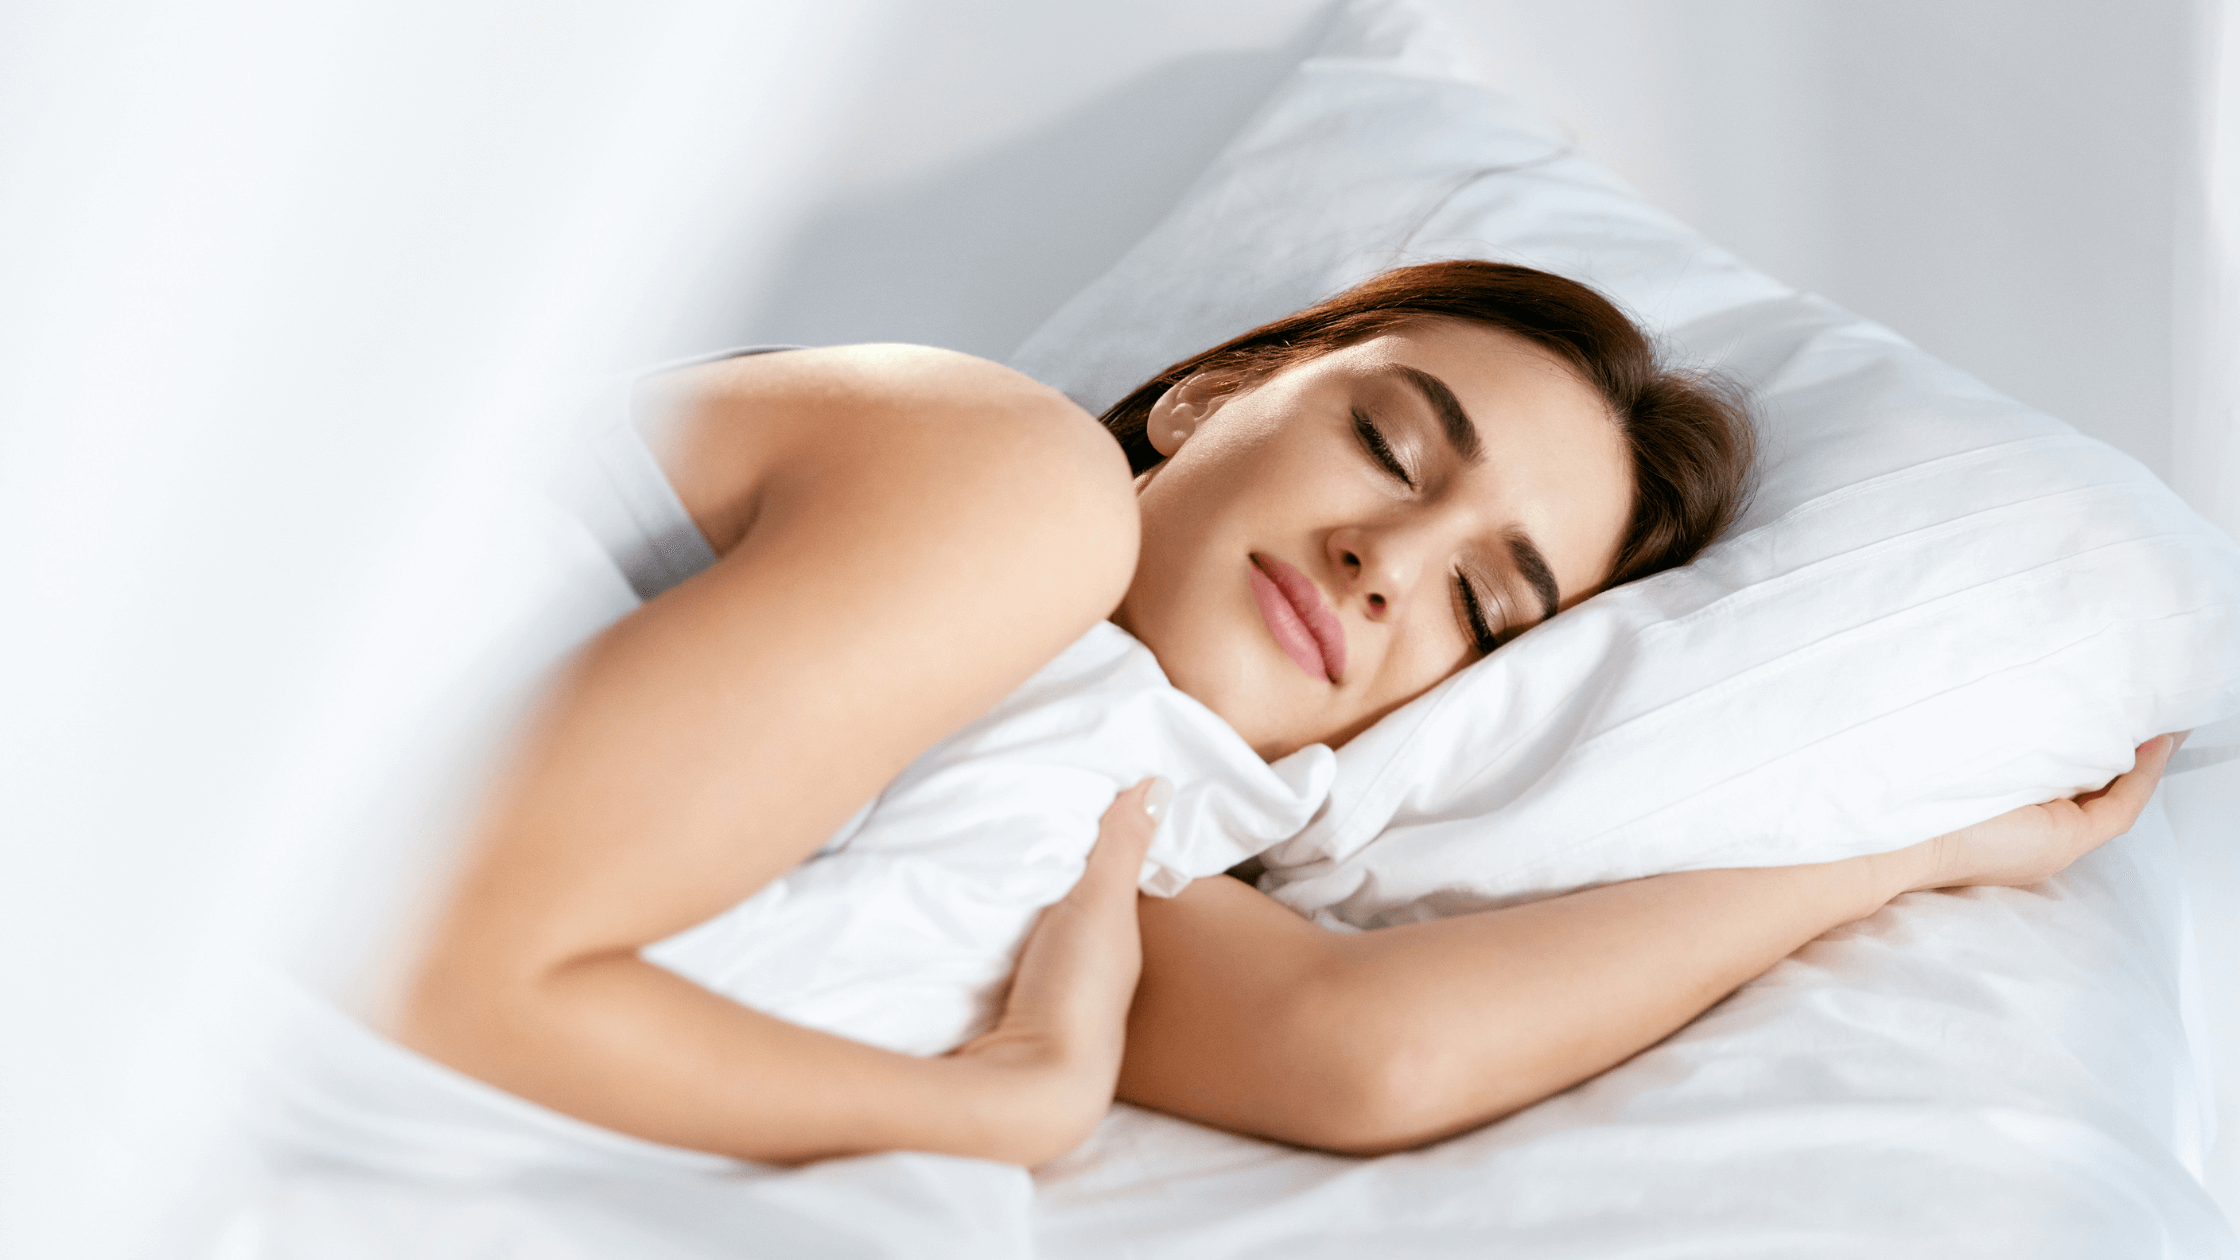 6 Essential Sleeping Tips After Your Breast Augmentation Procedure